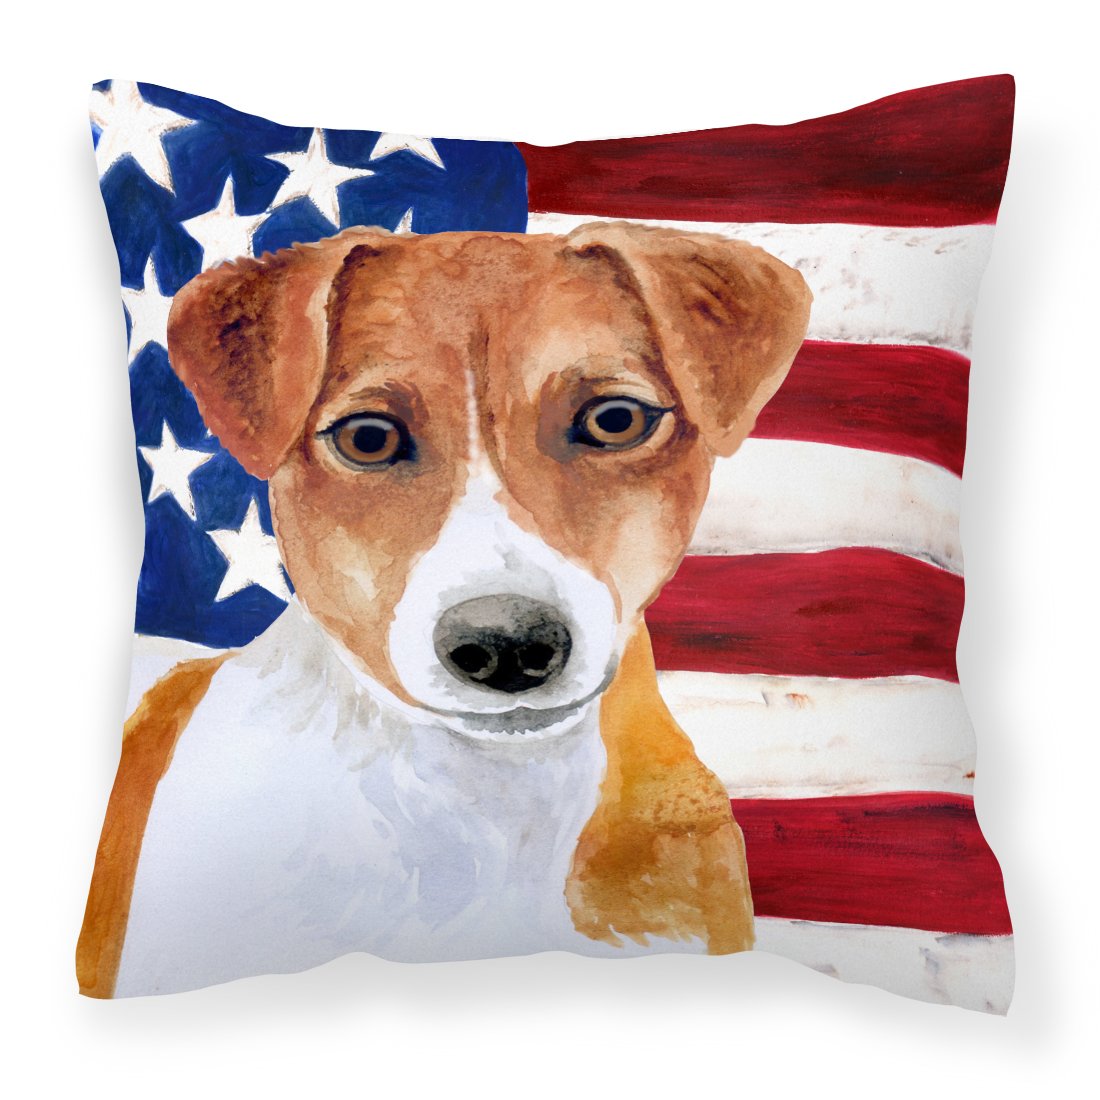 Jack Russell Terrier Patriotic Fabric Decorative Pillow BB9689PW1818 by Caroline's Treasures